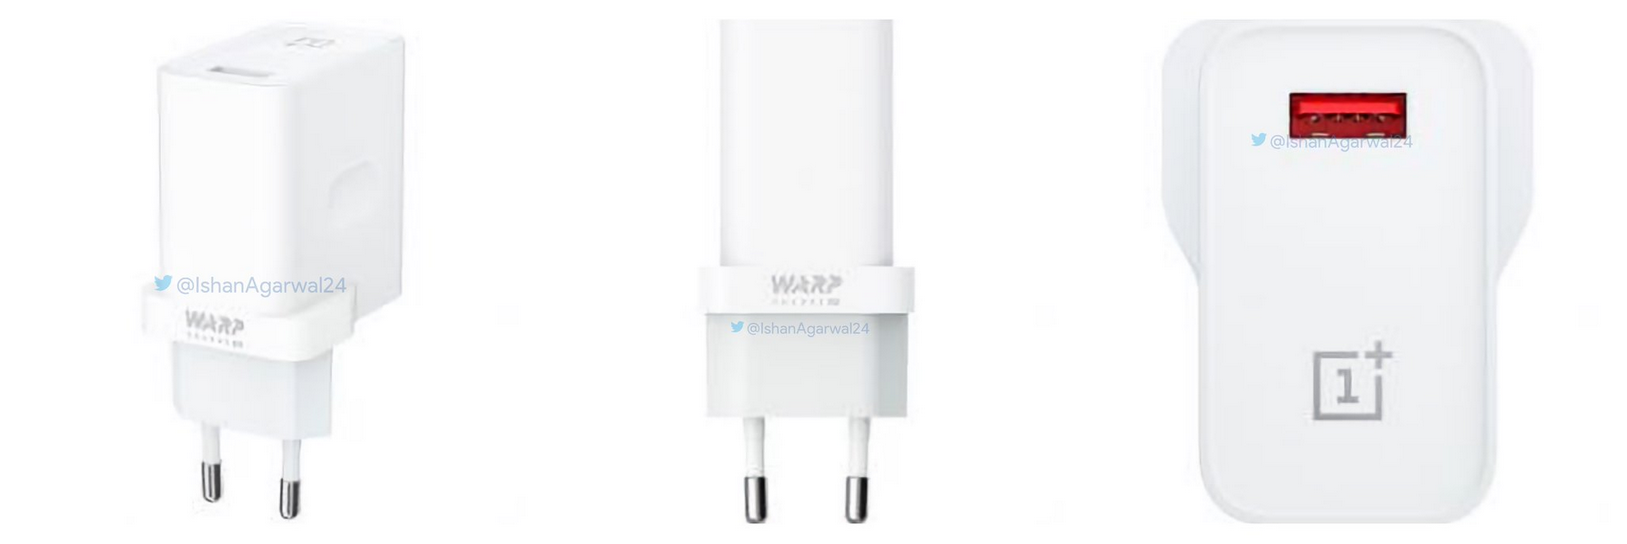 Official render of the Warp Charge Power Adapter - Official renders leak of some OnePlus 7 and 7 Pro accessories including the Bullets Wireless 2